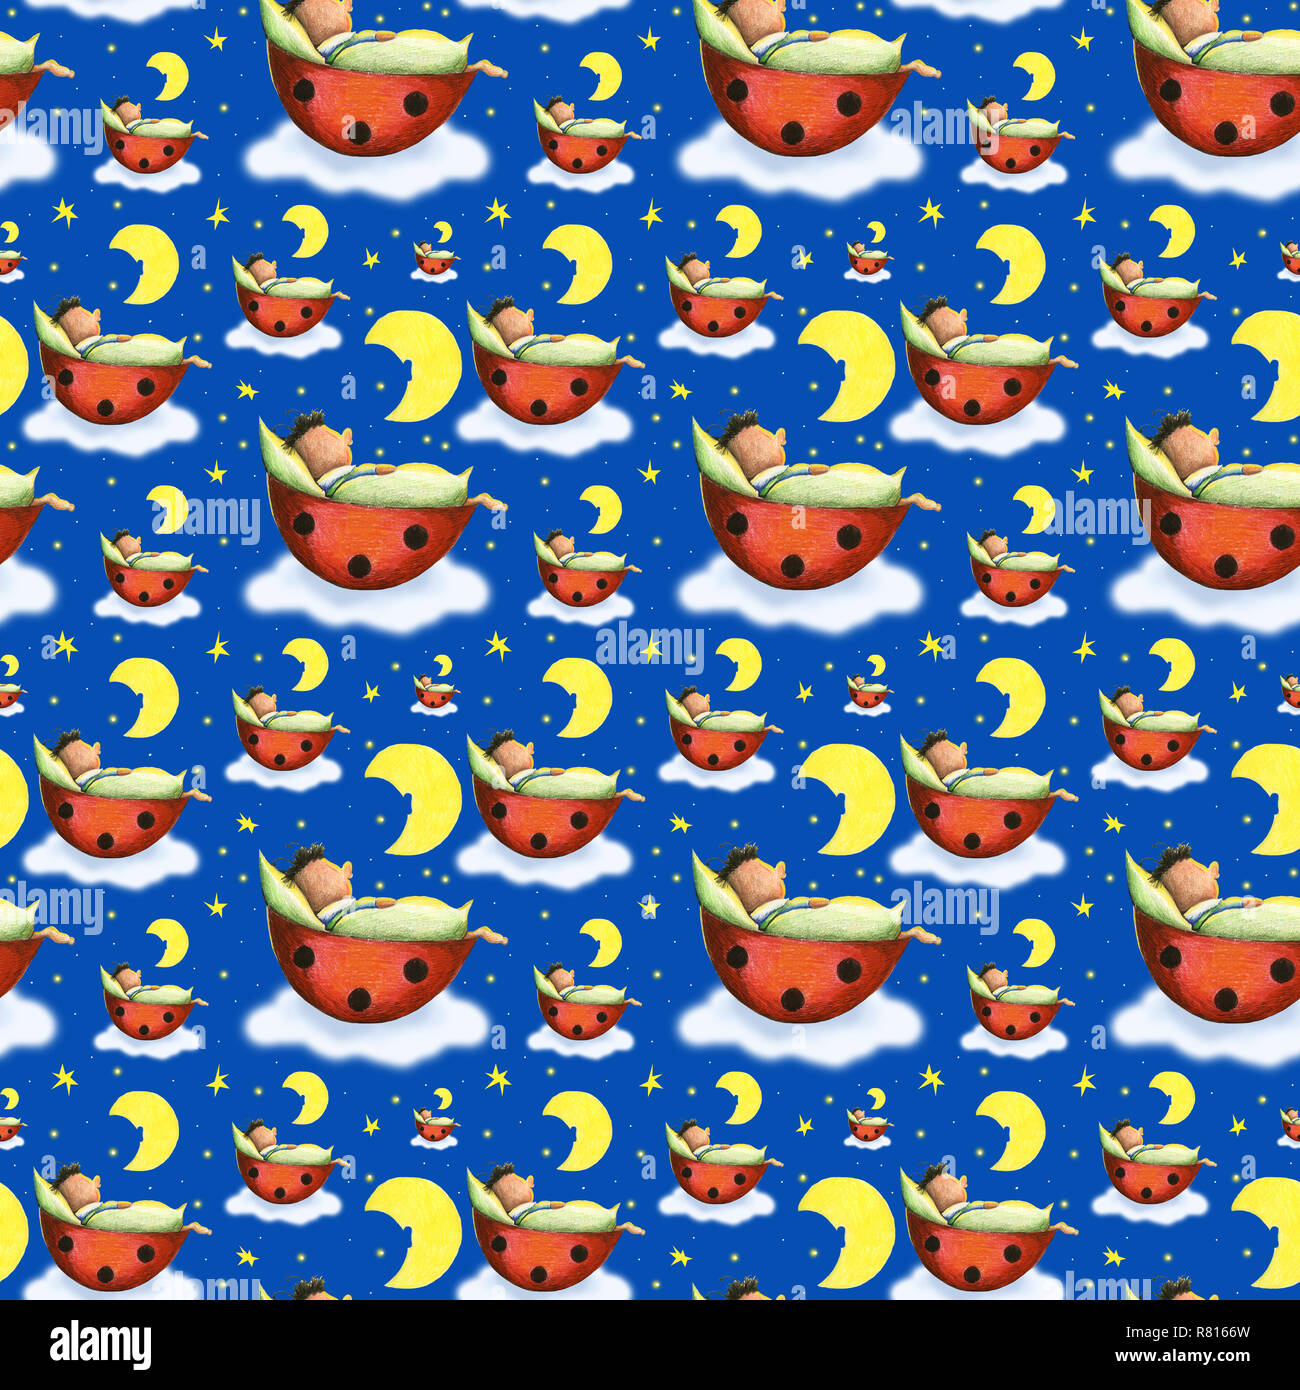 Wallpaper, wrapping paper, seamless pattern, lucky beetles dream in the starry sky, Germany Stock Photo